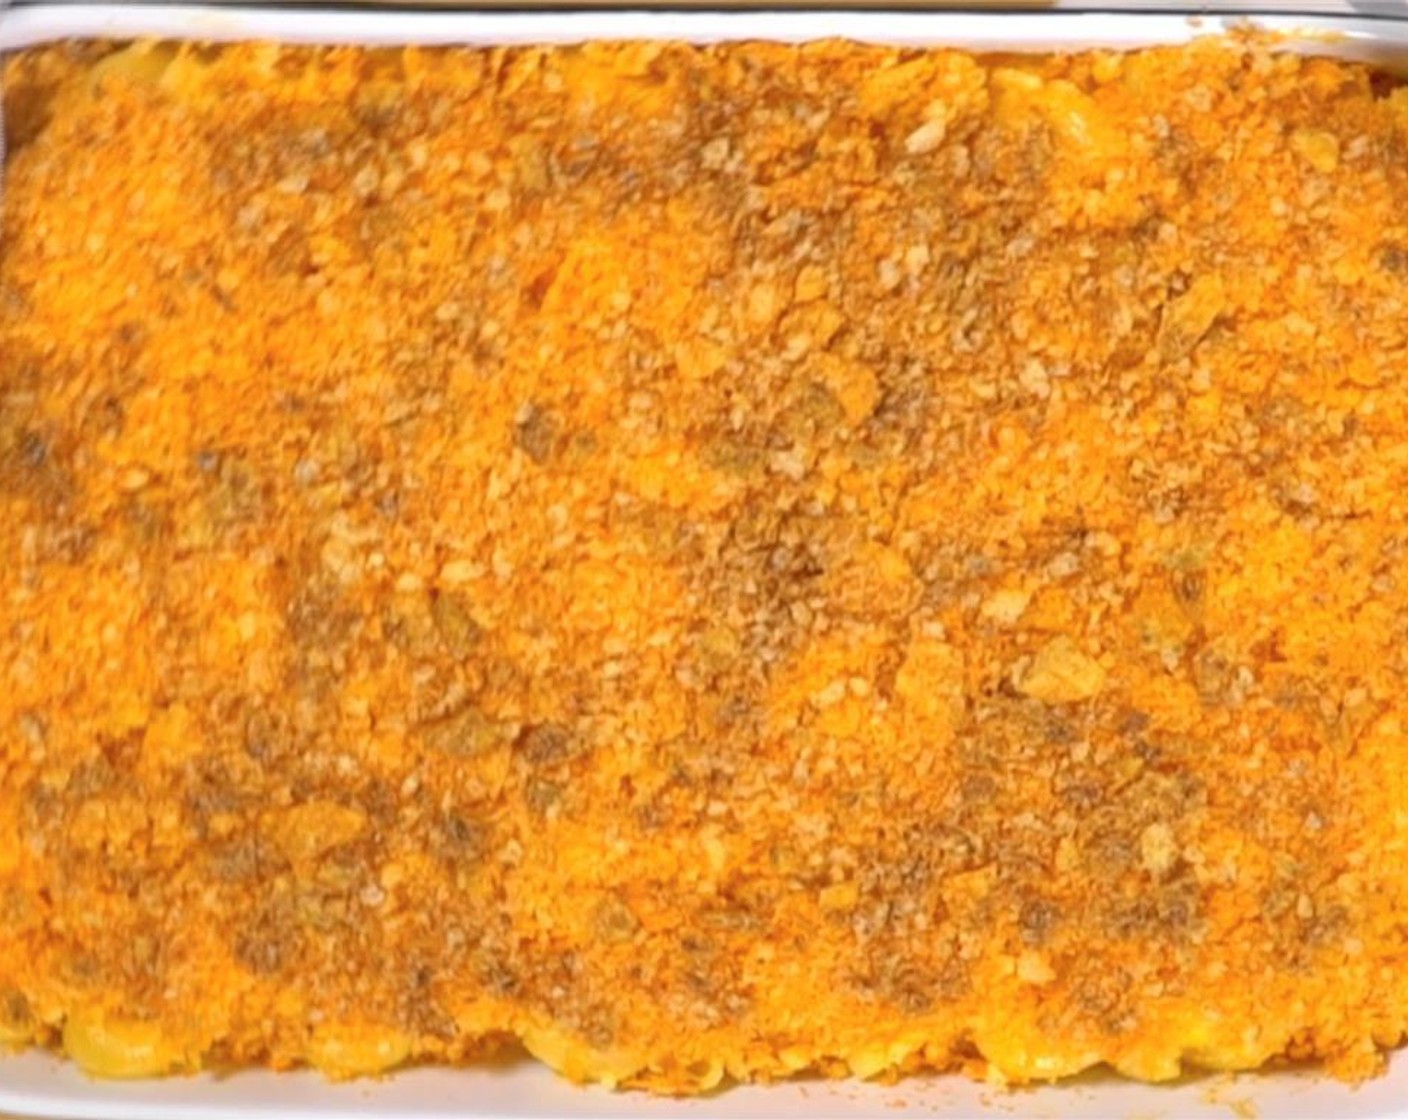 step 7 Bake in the oven until golden brown-keep an eye because the Doritos brown quicker than the Cheetos. Let rest for 5 minutes, then serve.